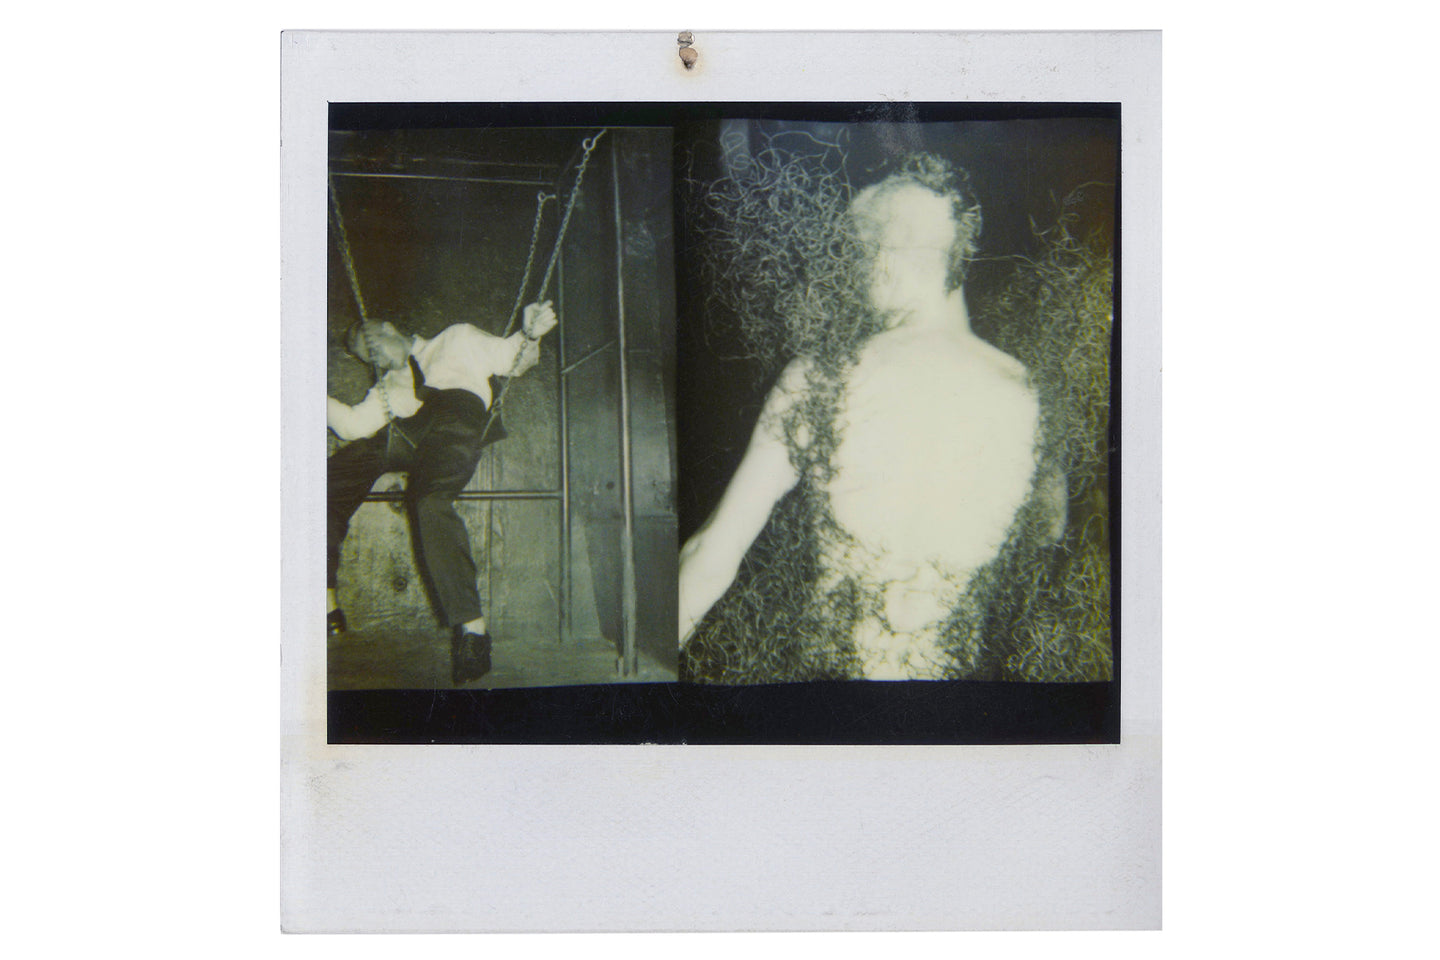 Boy in Swing and in Wire Dress, 1995